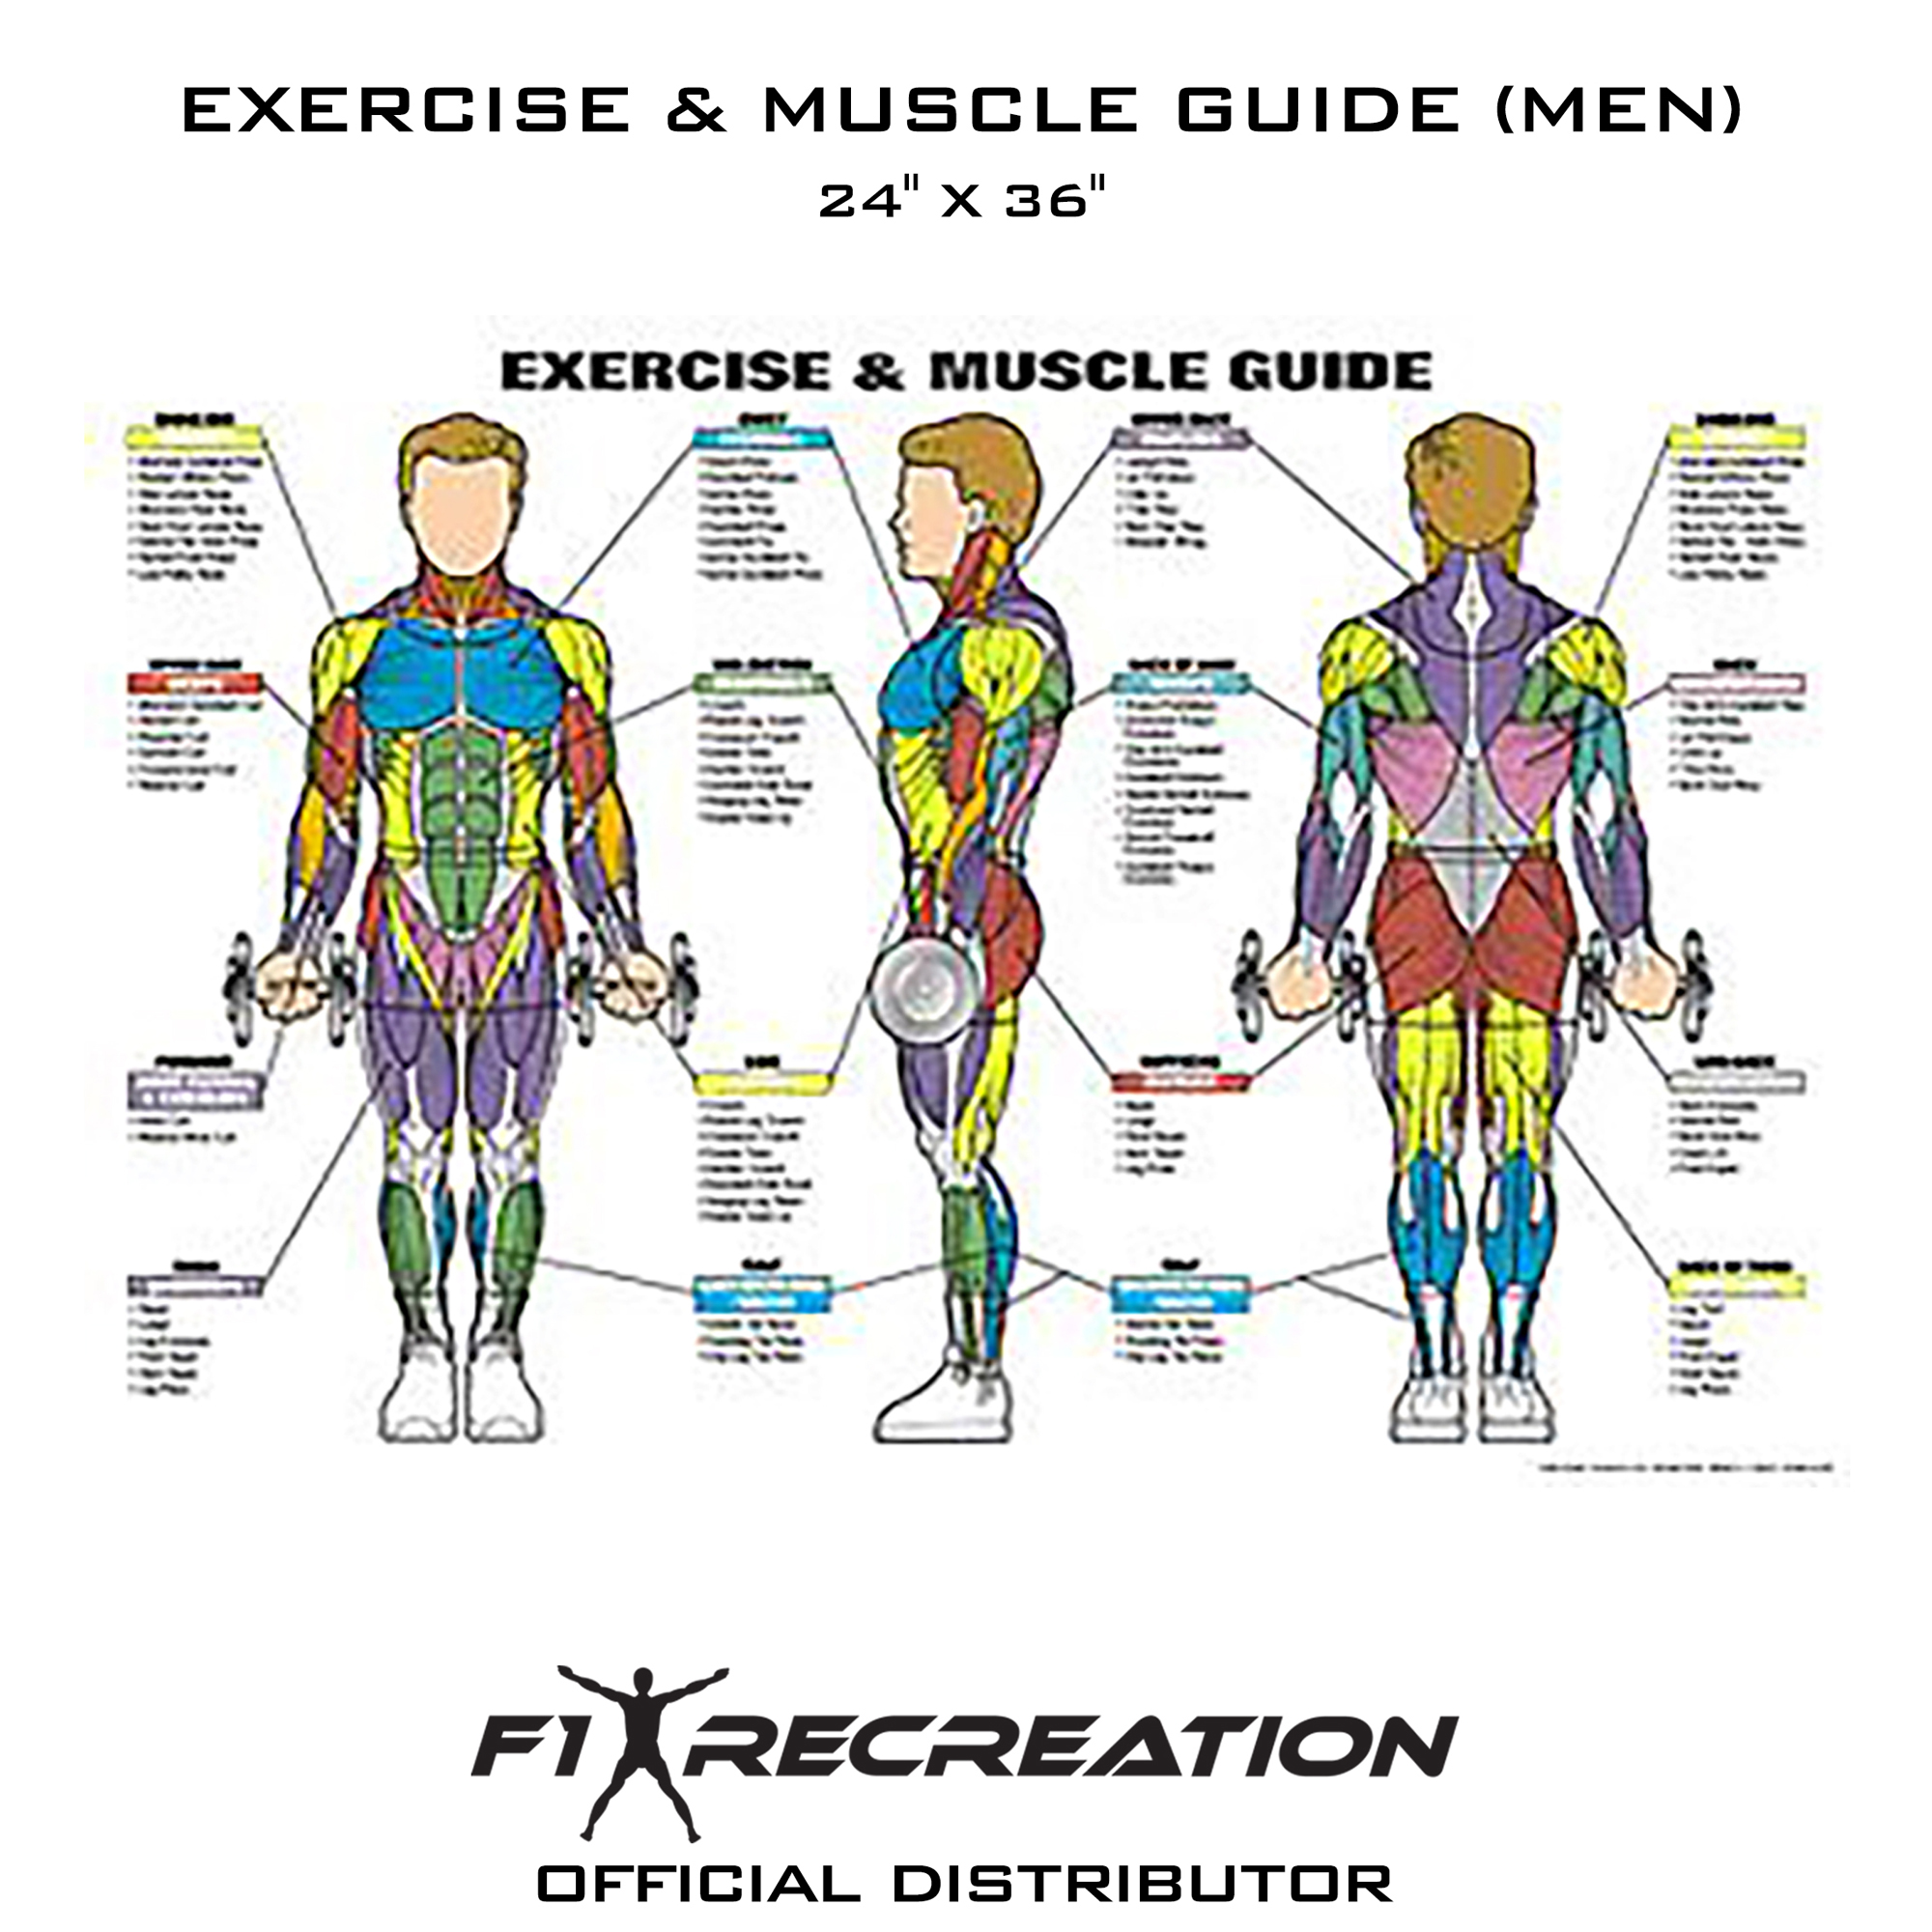 F1 Recreation Original Exercise & Muscle Guide Fitness Chart (Men) NFC1